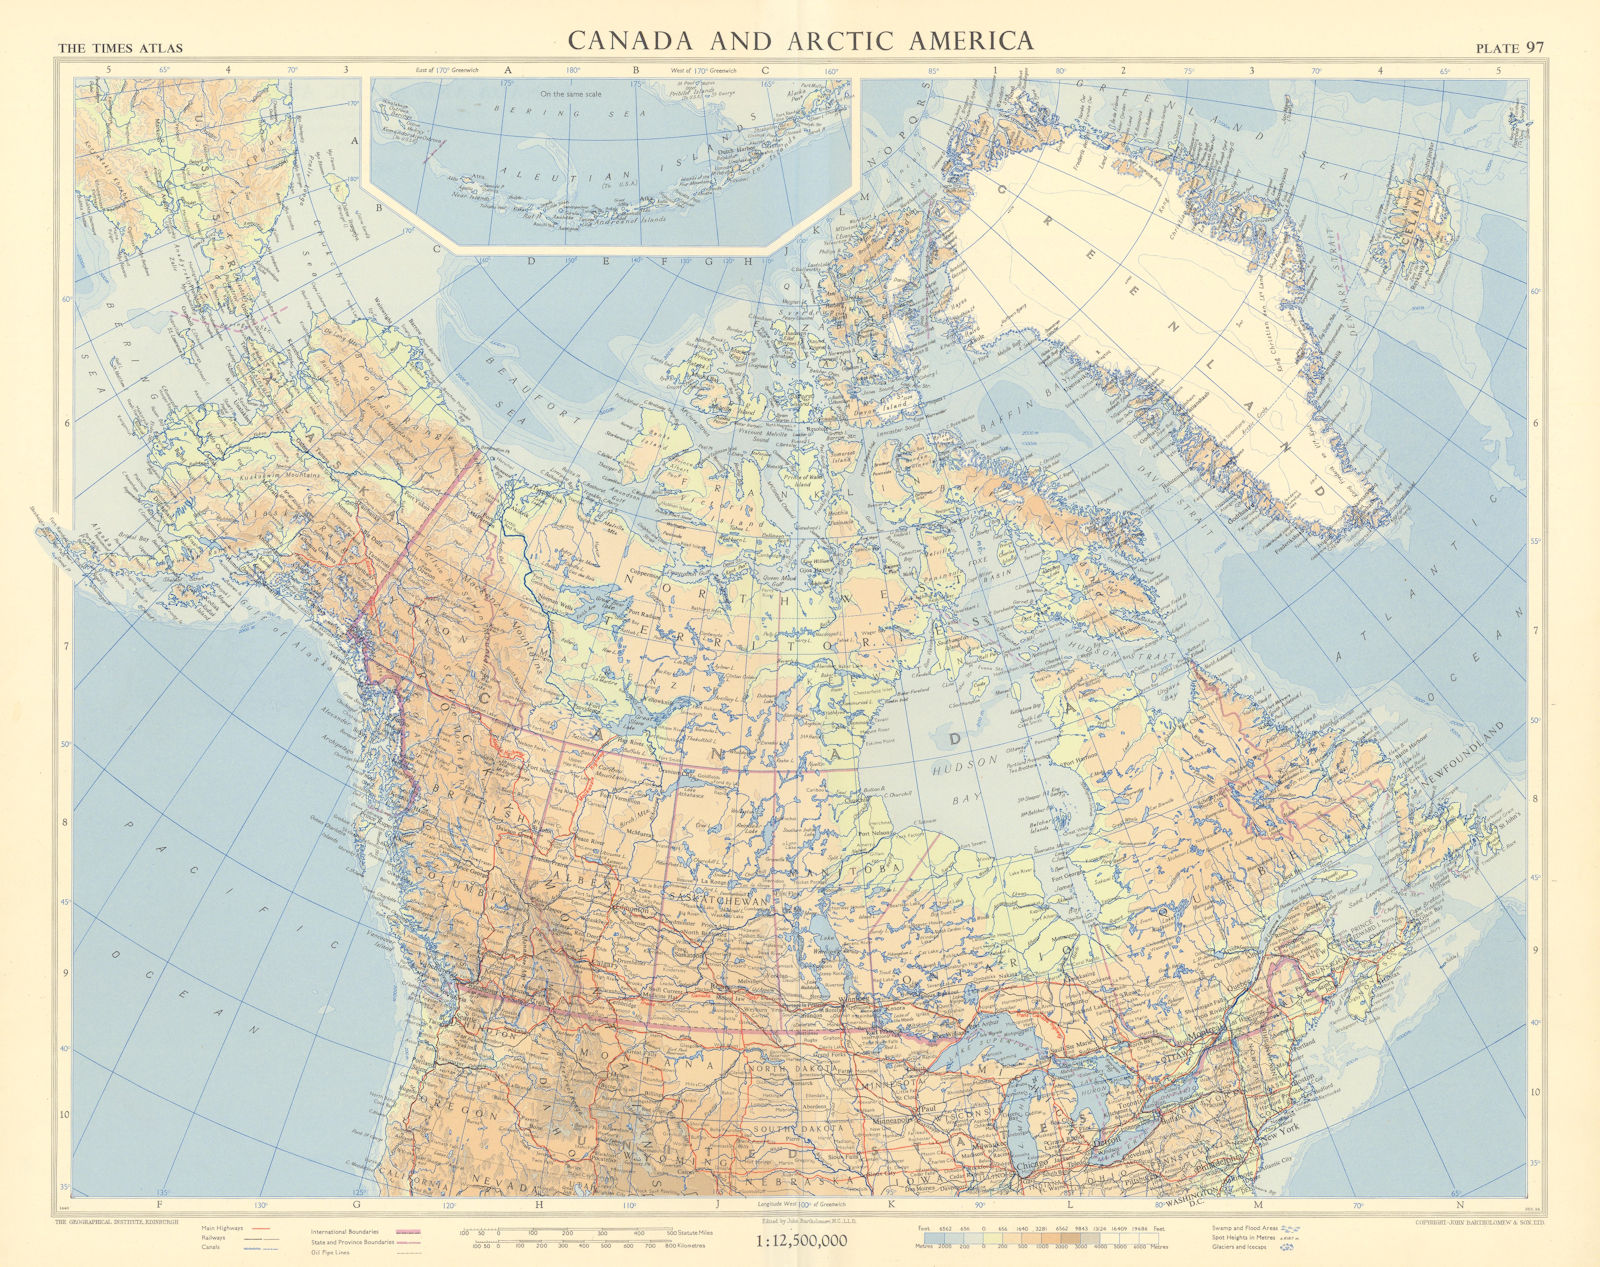 Associate Product Canada and Arctic America. Greenland Alaska. TIMES 1957 old vintage map chart